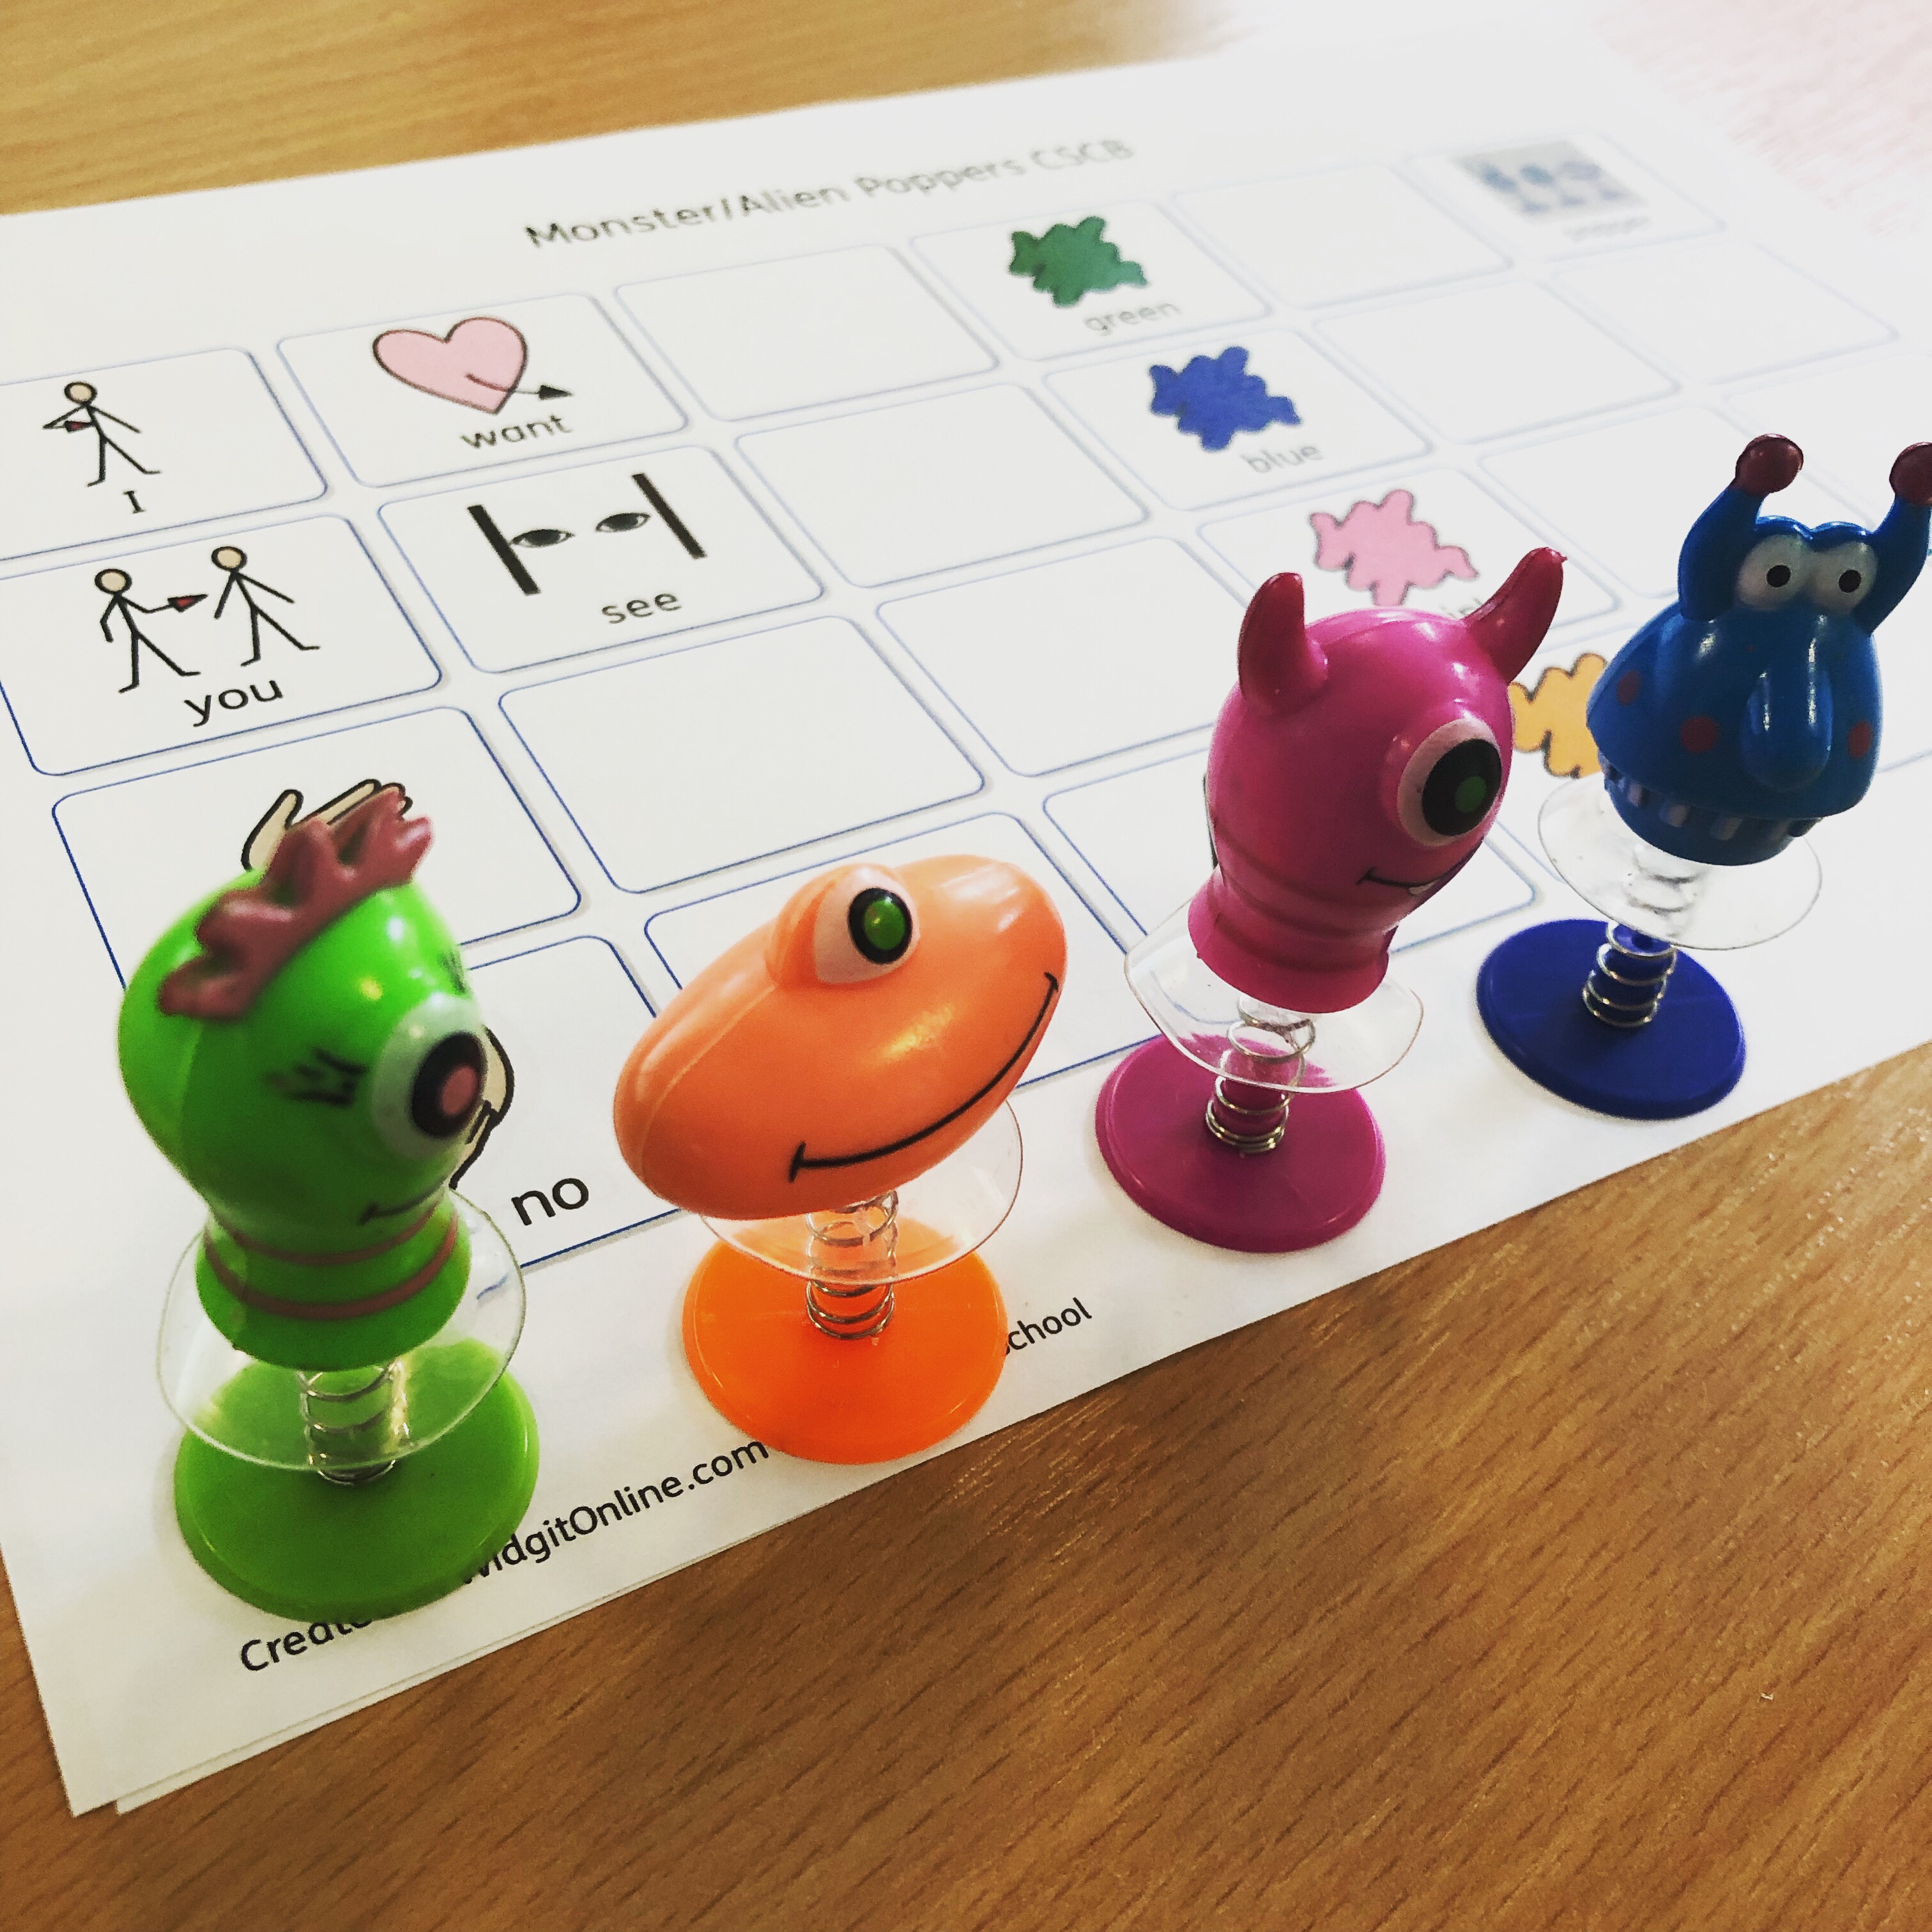 free ALIENS CSCB communication game board